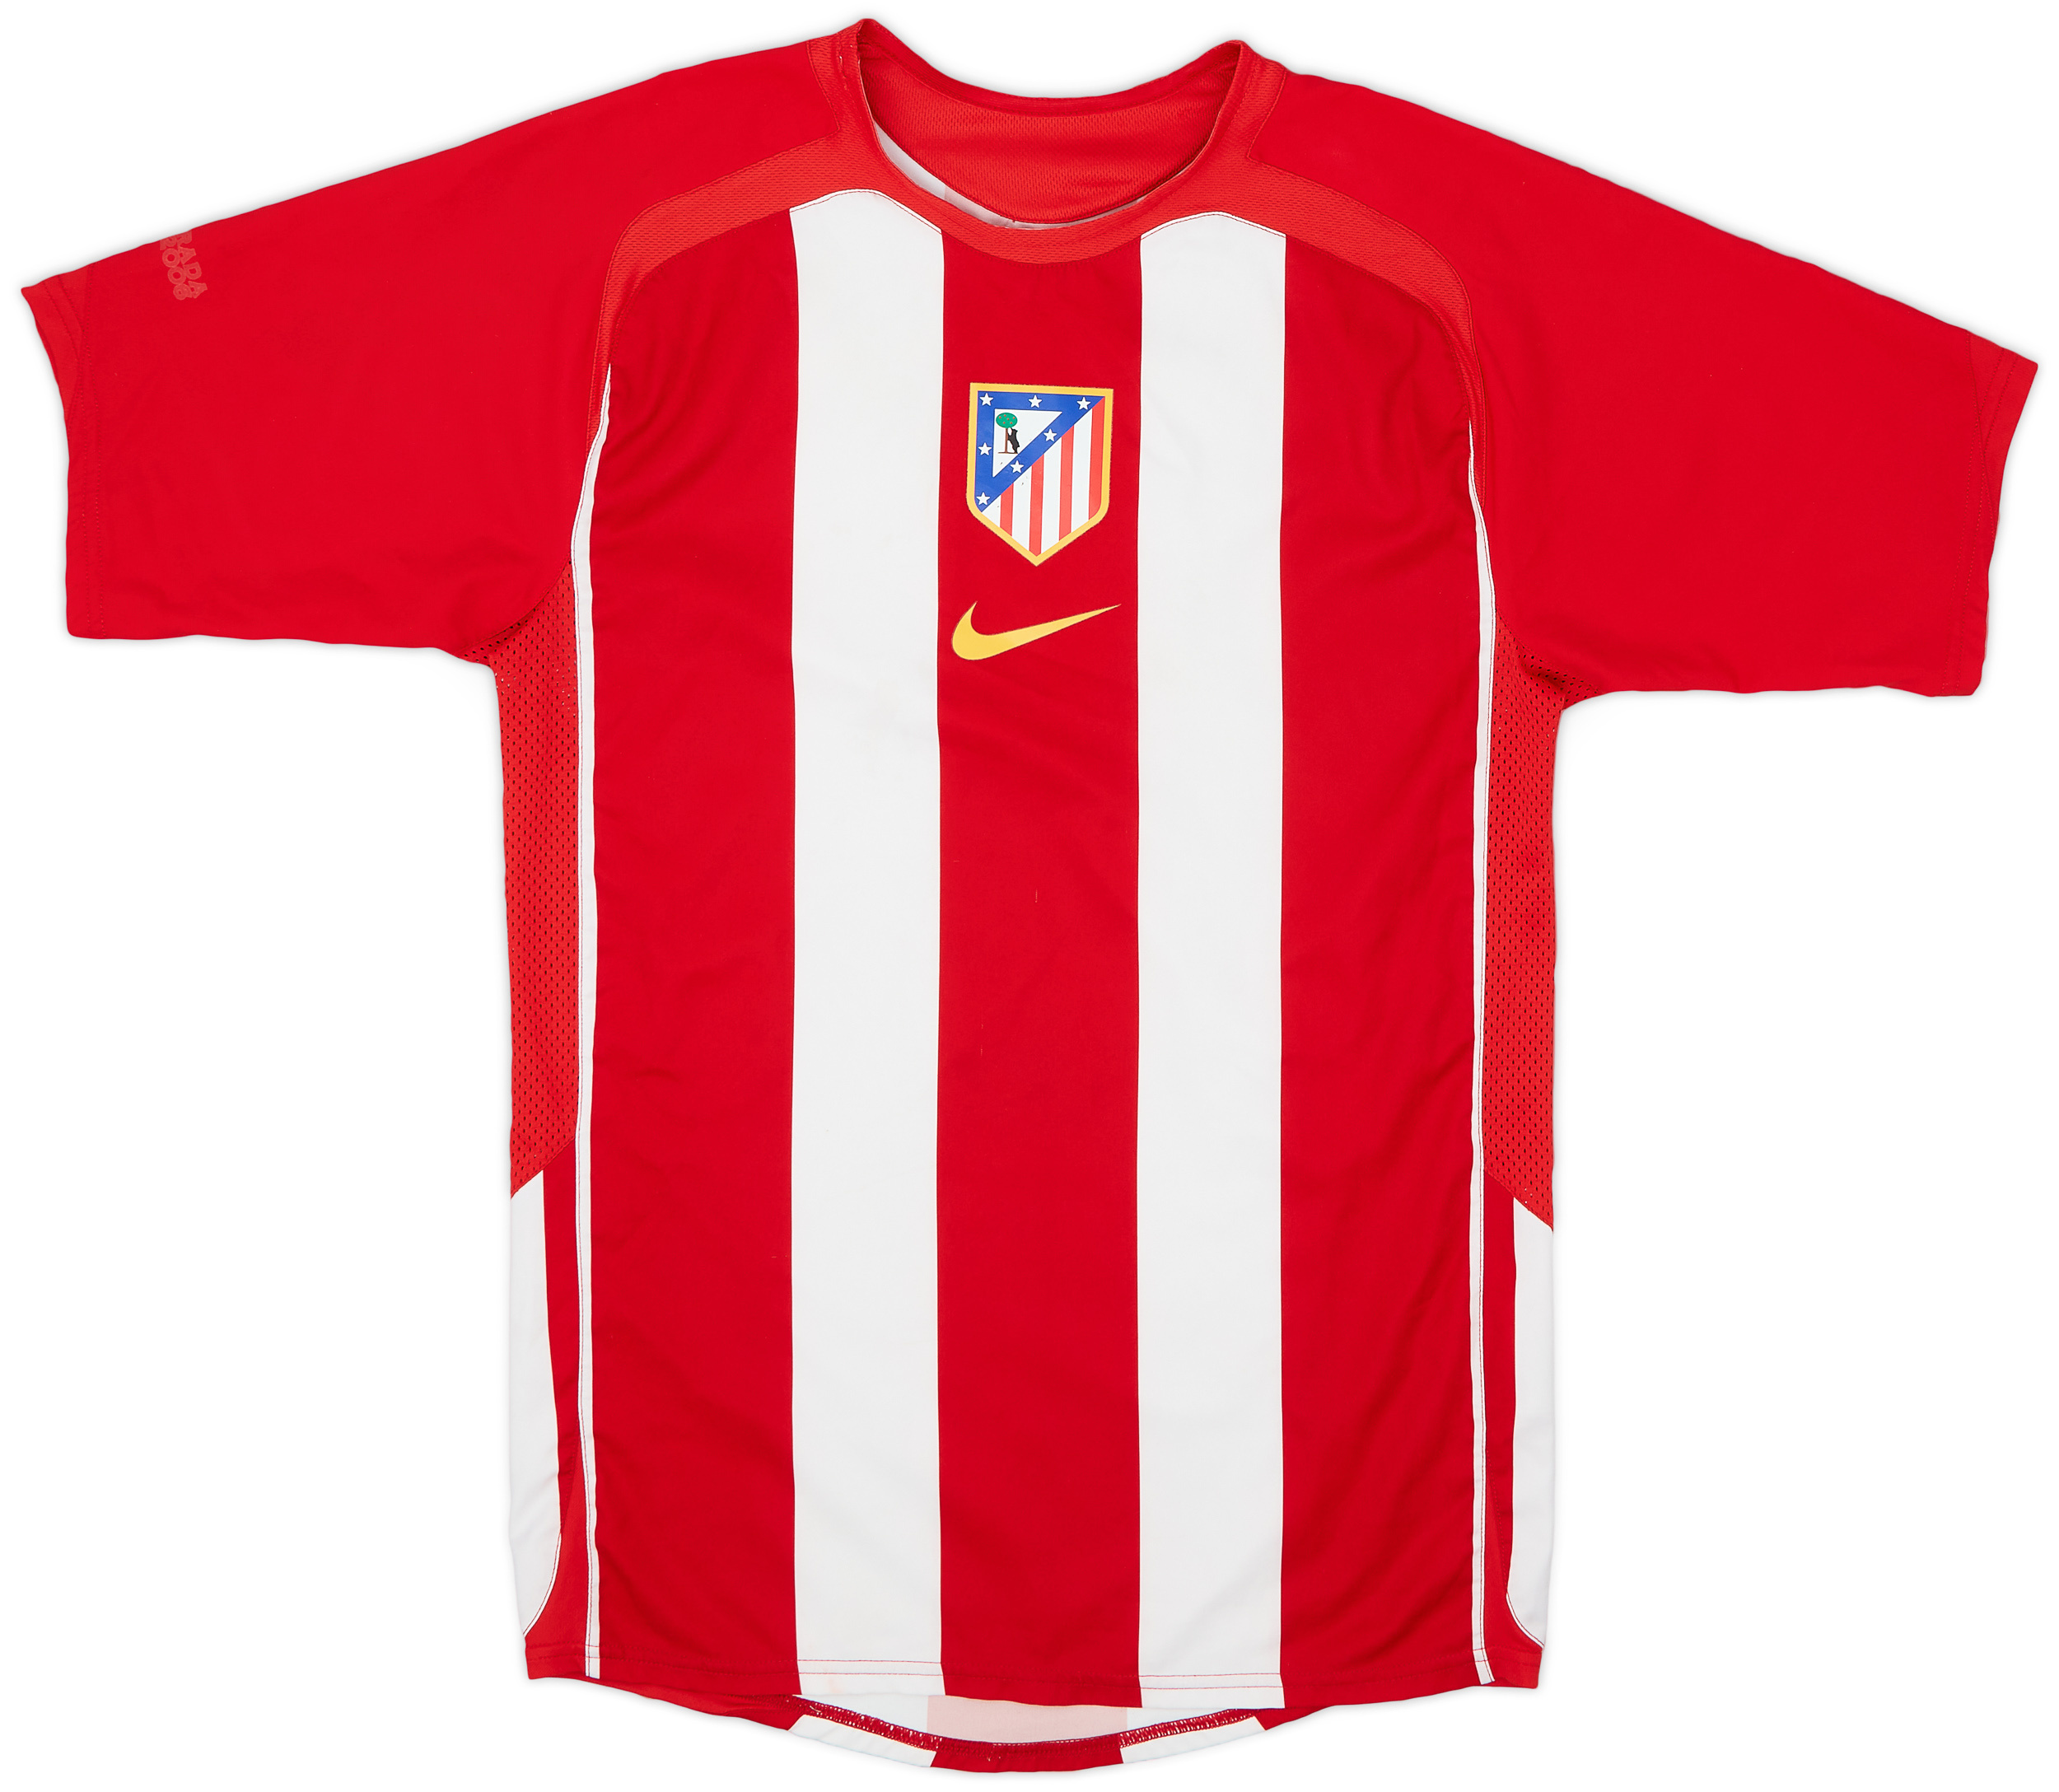 2005-06 Atletico Madrid Player Issue Home Shirt - 4/10 - ()